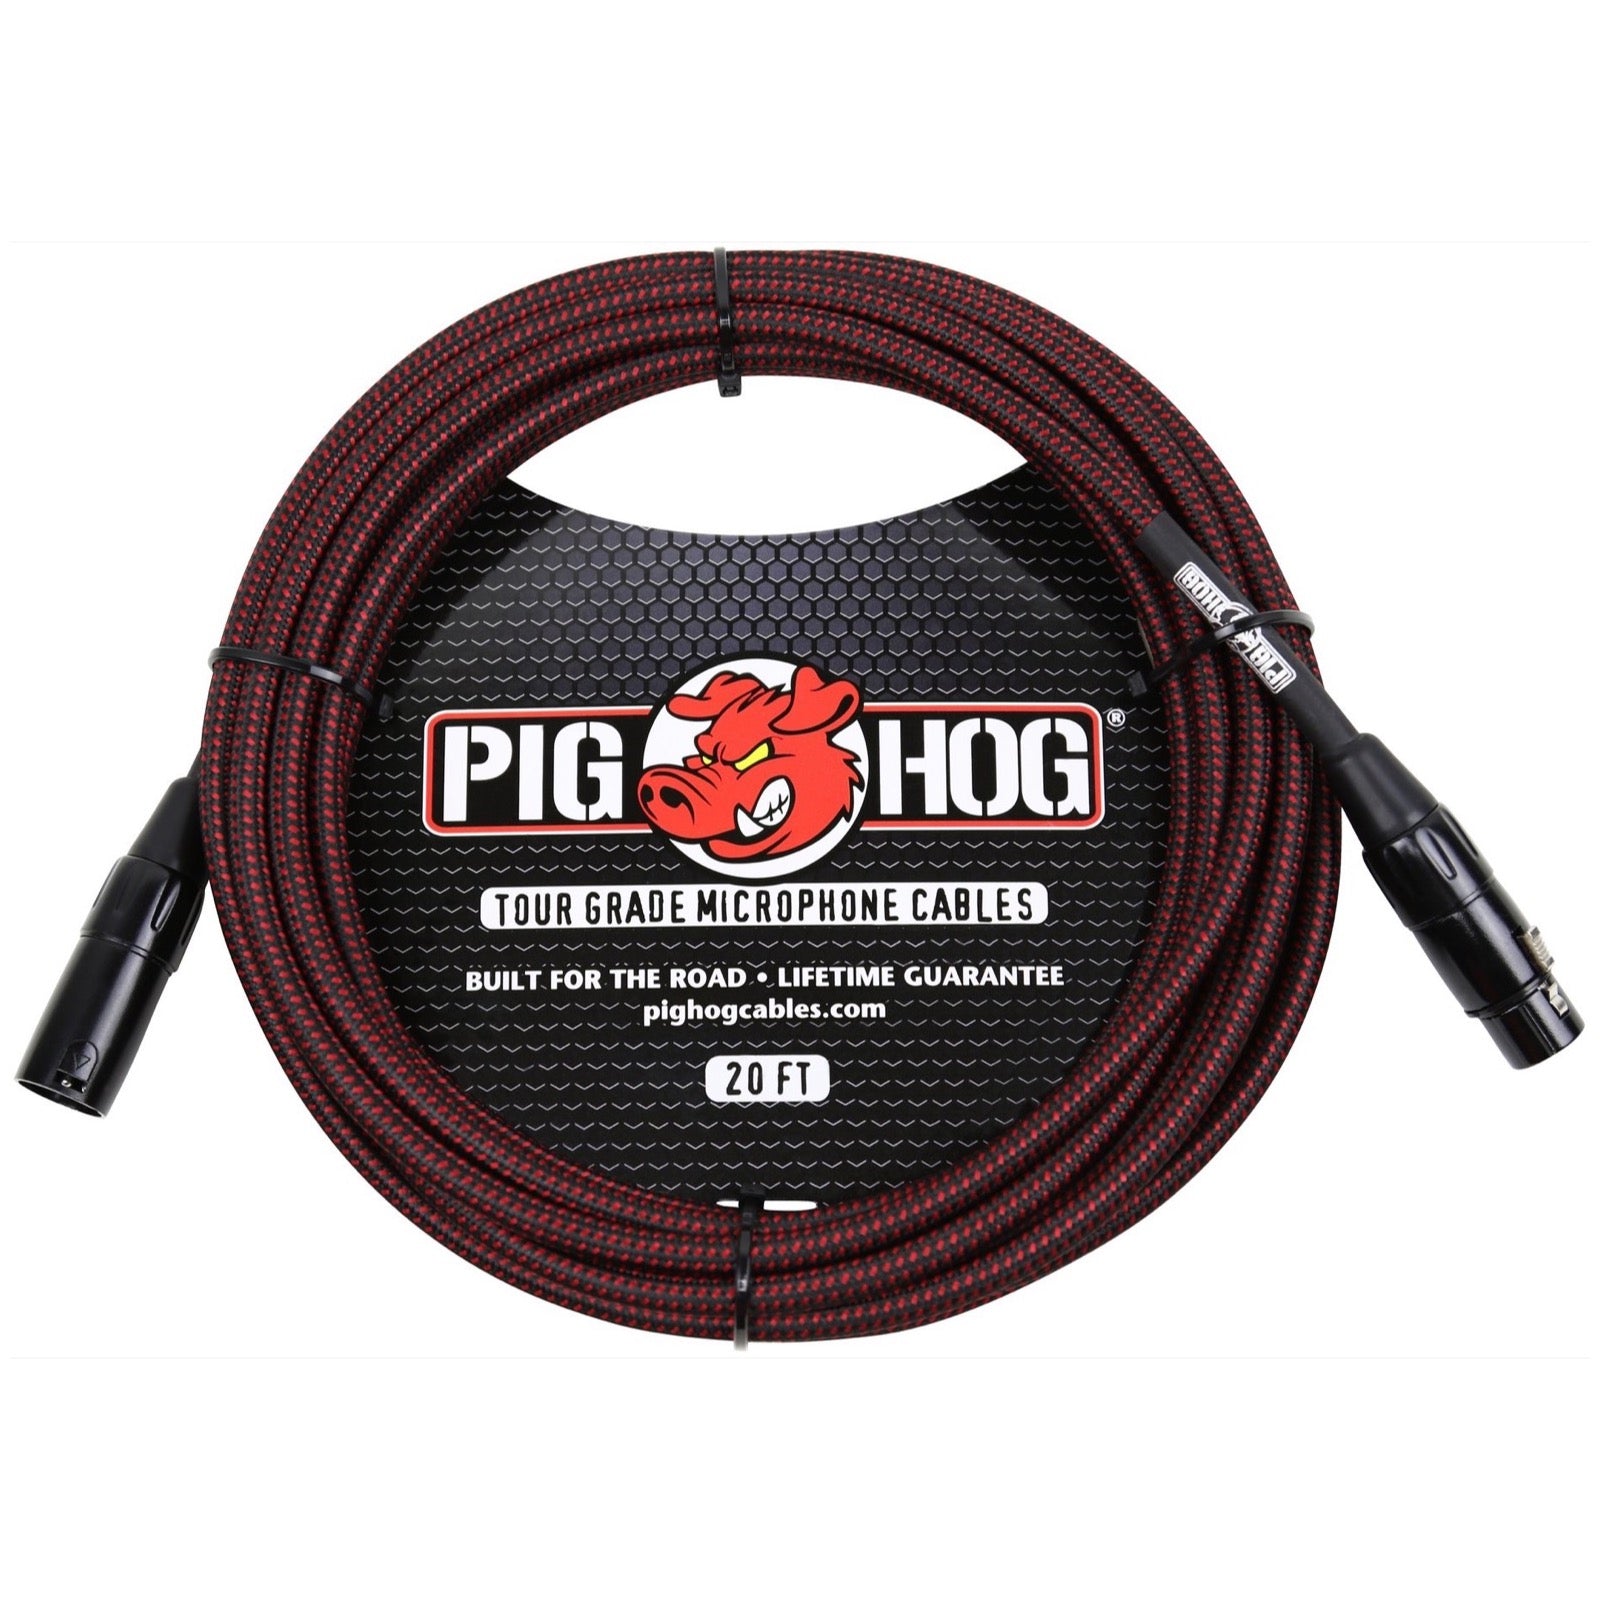 Pig Hog Woven XLR Microphone Cable, Black and Red, 20 Foot